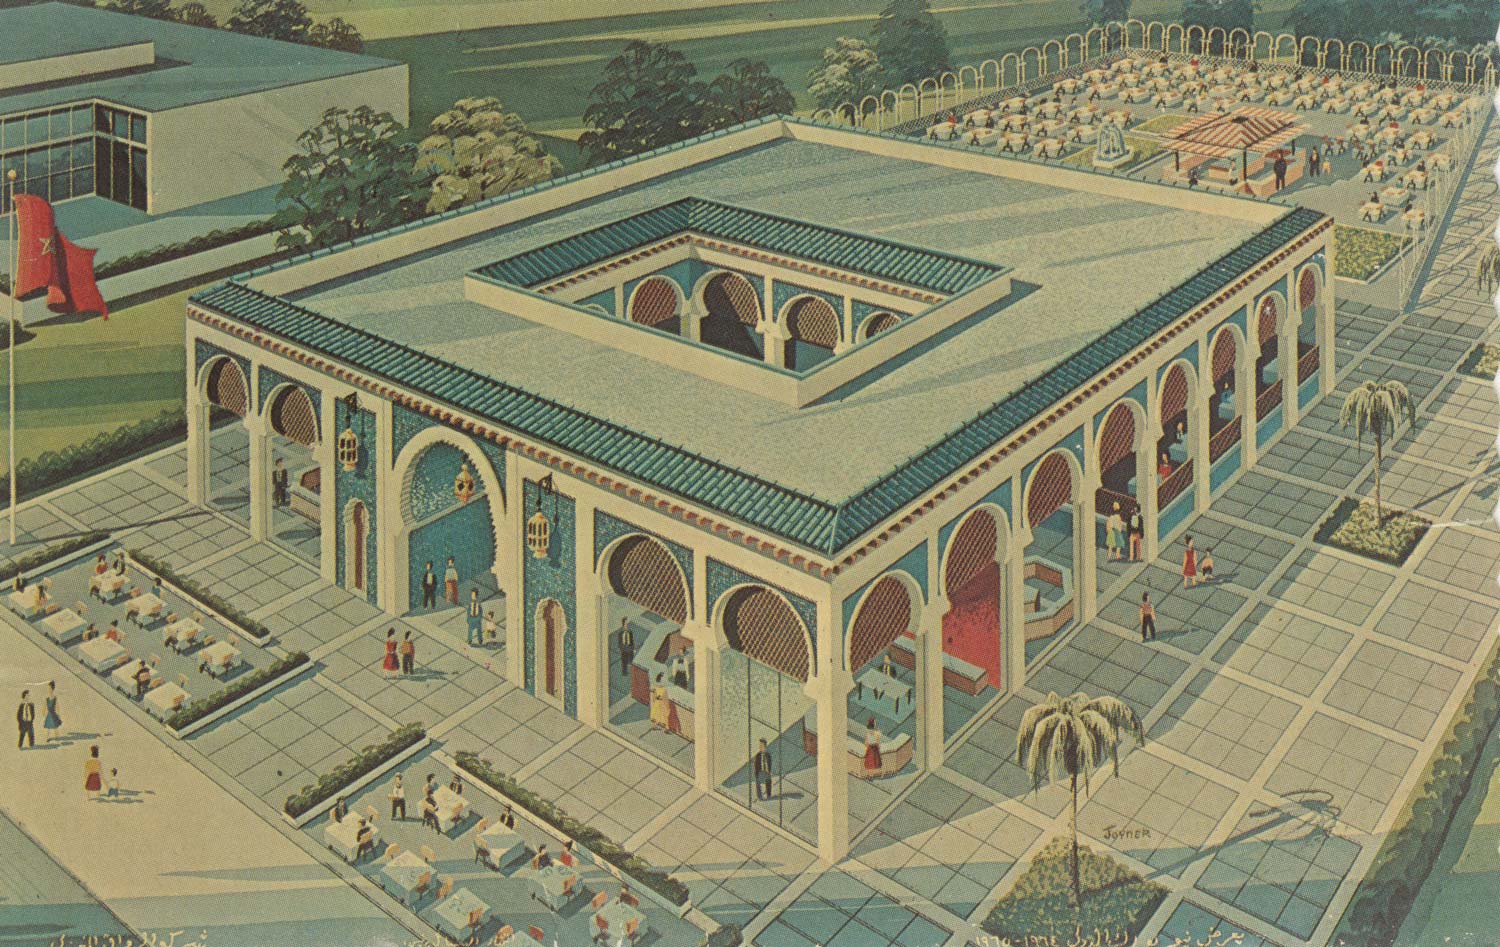 Moroccan Pavilion at the 1964-1965 World's Fair